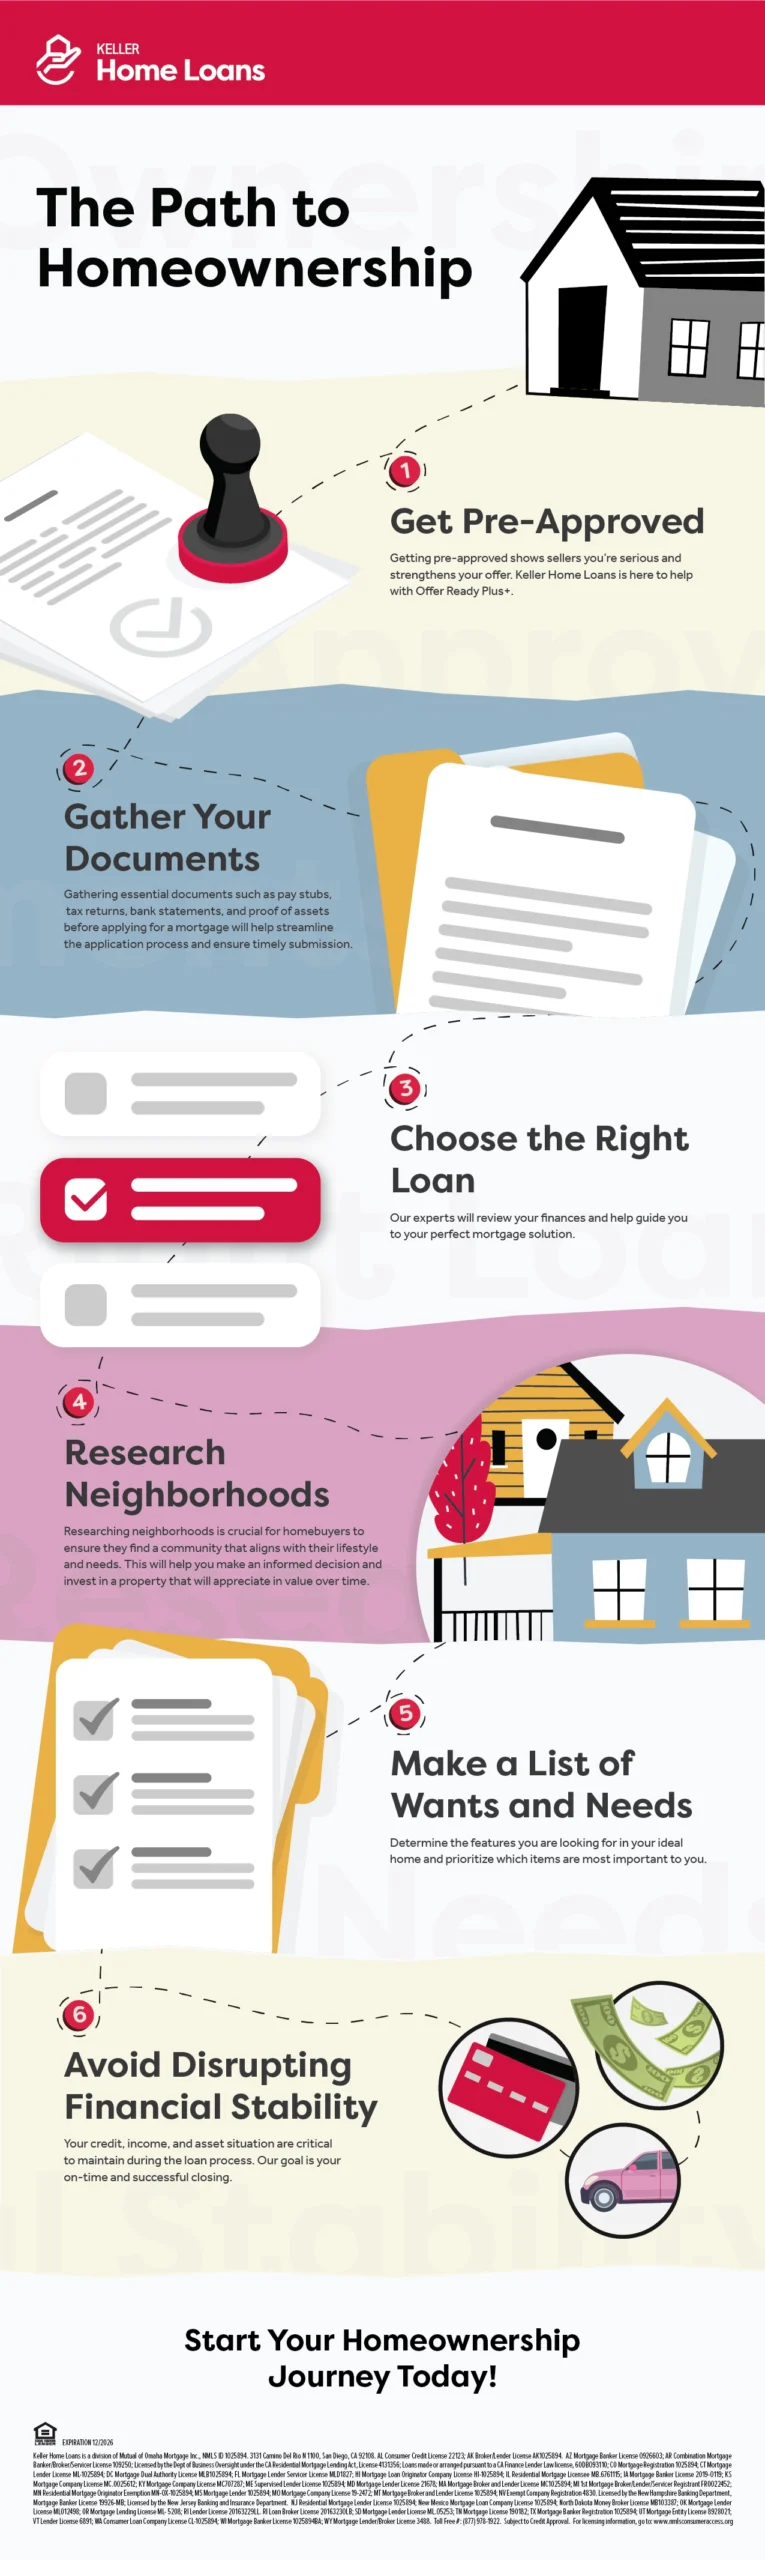 KHL_23_Path-to-Homeownership_Infographic_1239454502